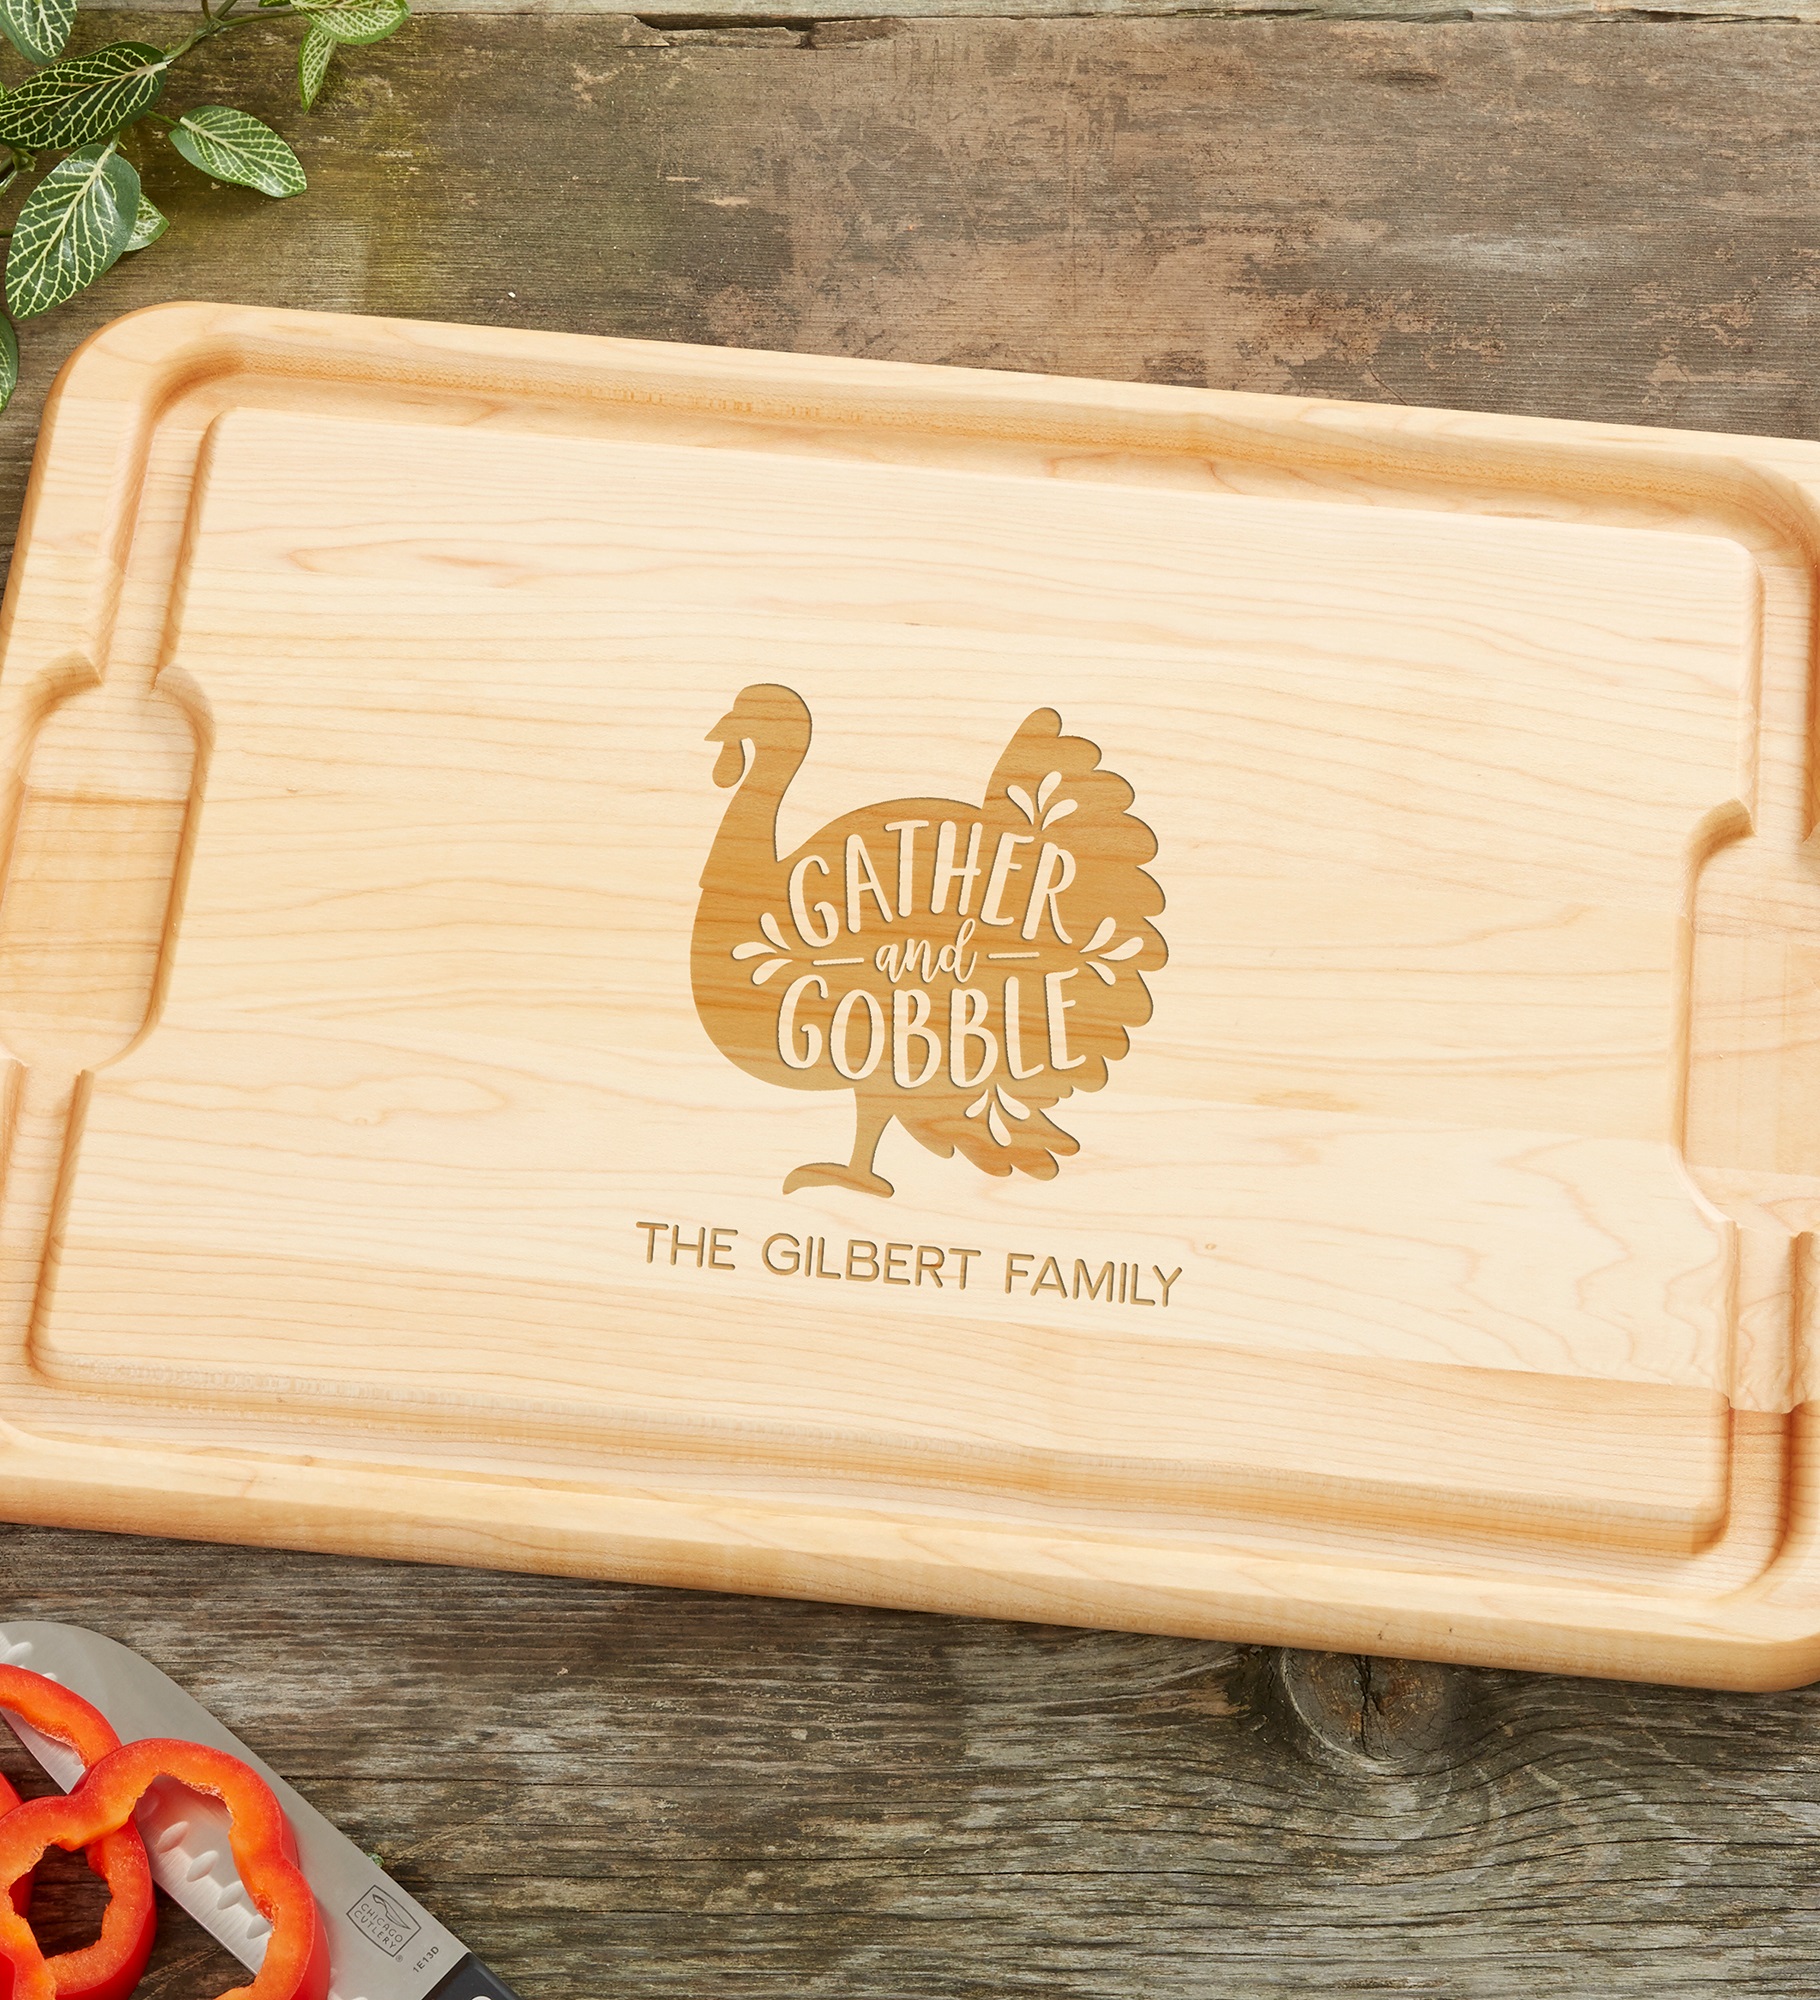 Gather & Gobble Personalized Hardwood Cutting Board